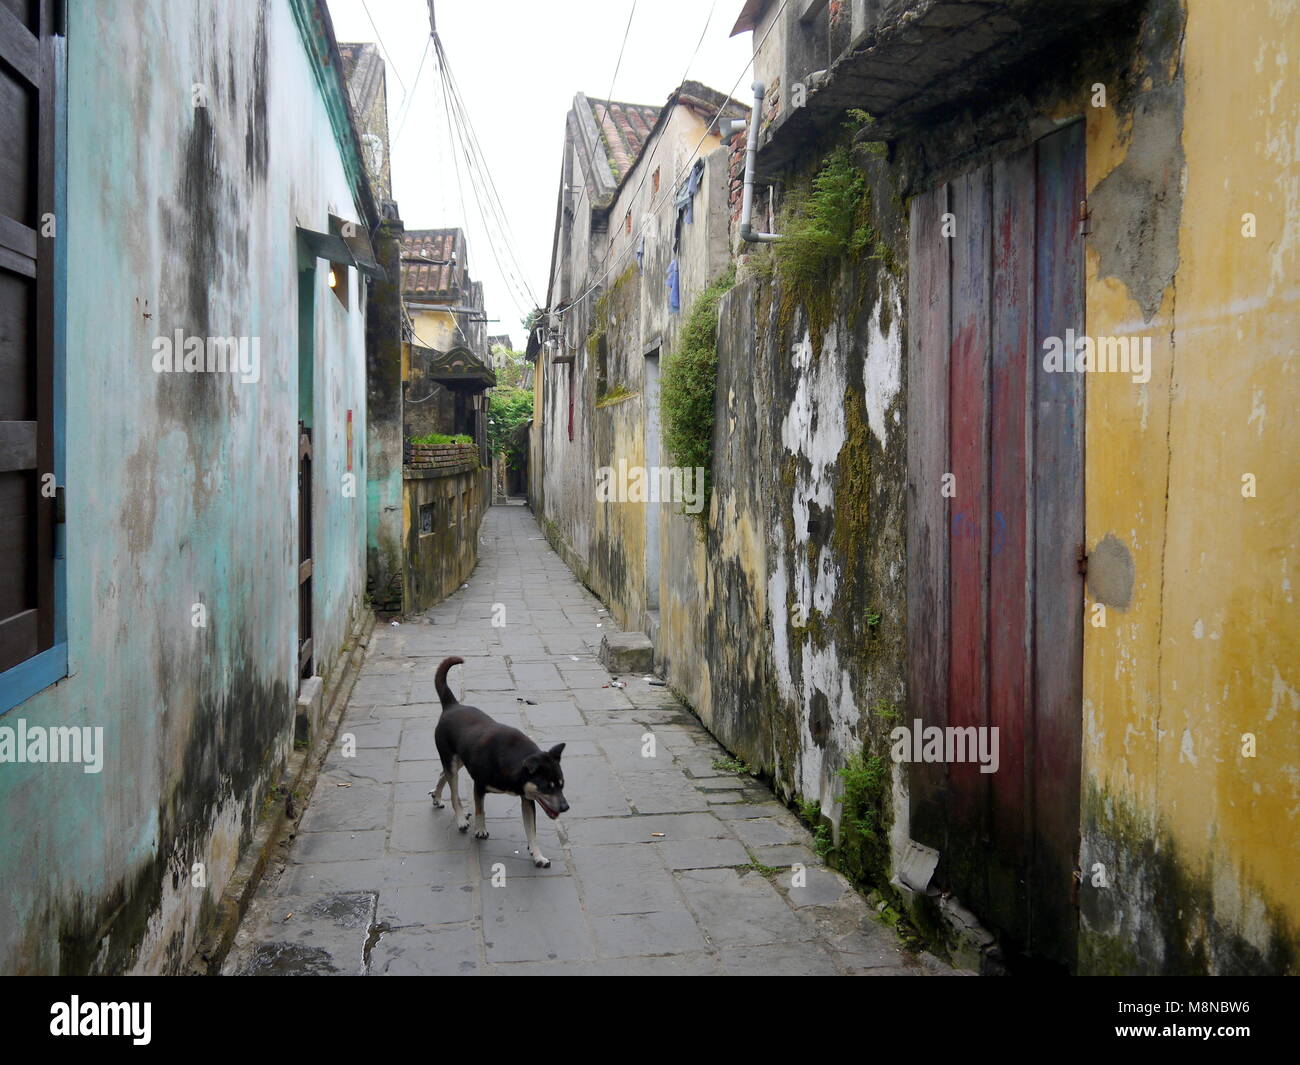 Dog on the narrow street of old town Hoi An with colorful moss walls Stock Photo